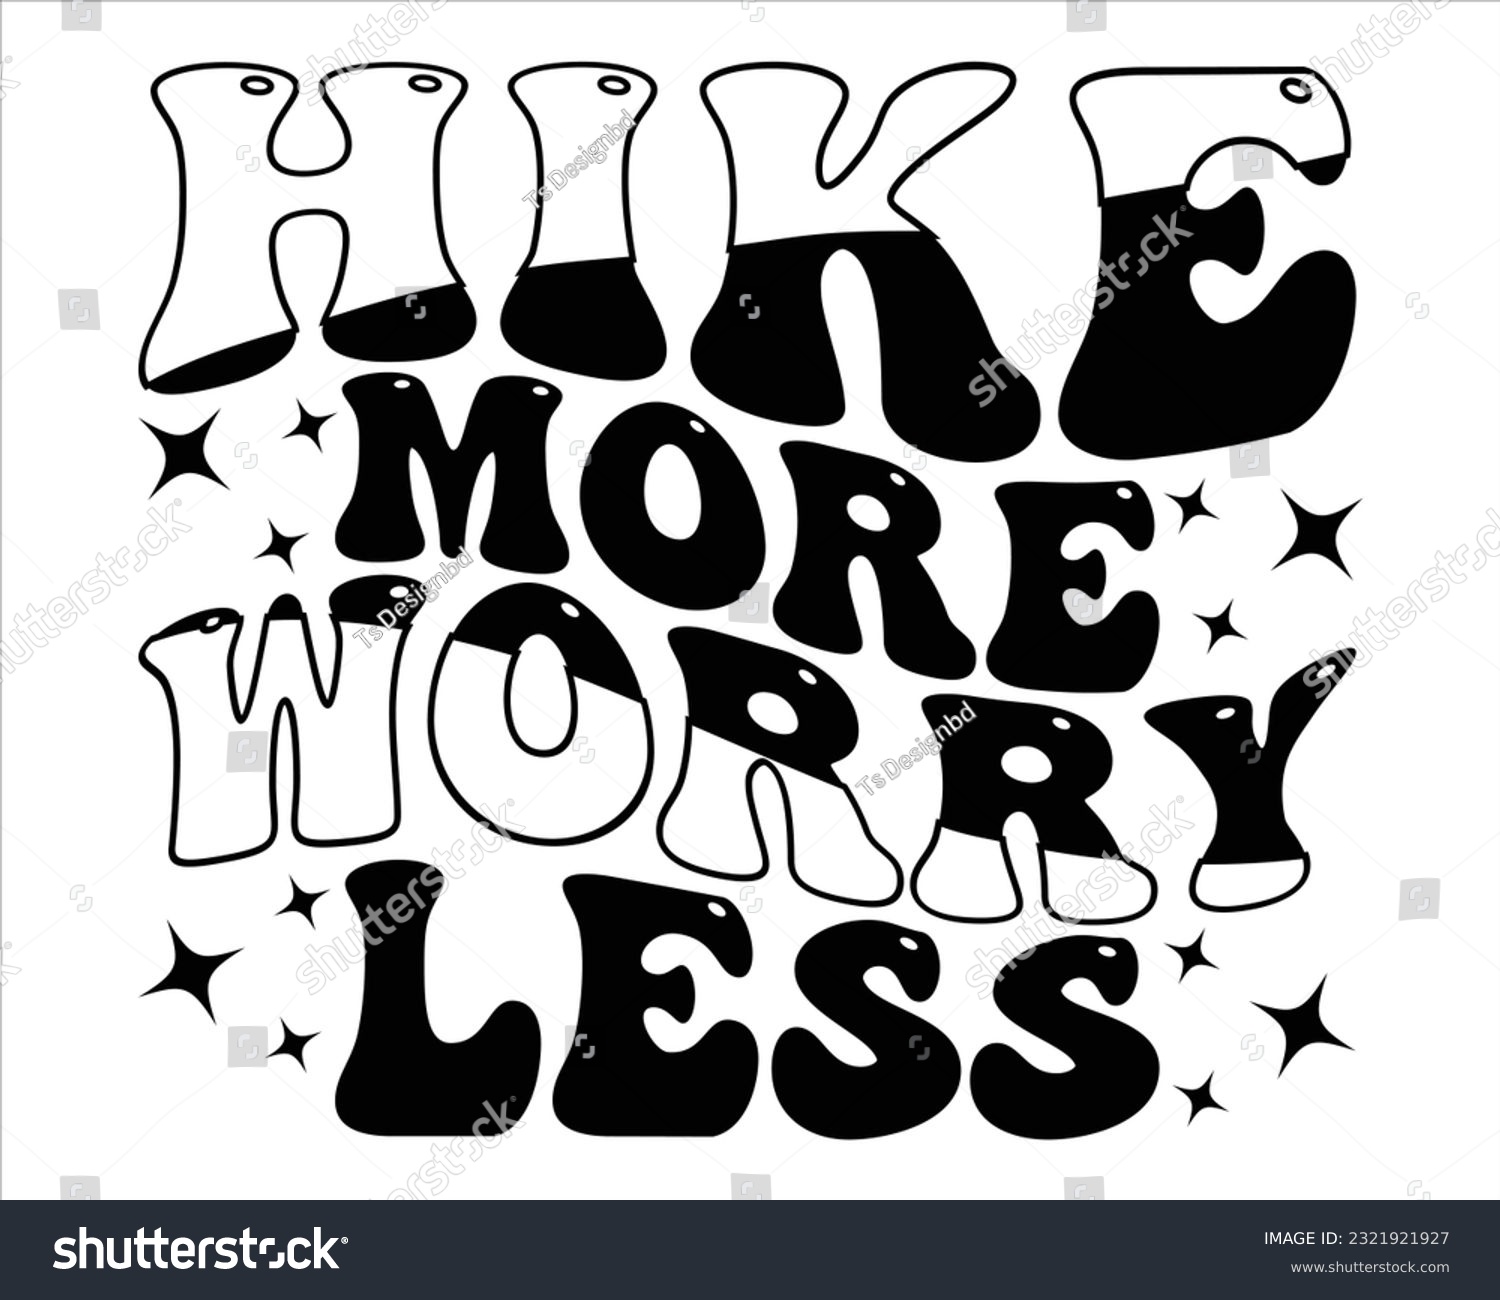 SVG of Hike More Worry  less Retro Svg Design,Hiking Retro Svg Design, Mountain illustration, outdoor adventure ,Outdoor Adventure Inspiring Motivation Quote, camping,groovy design svg